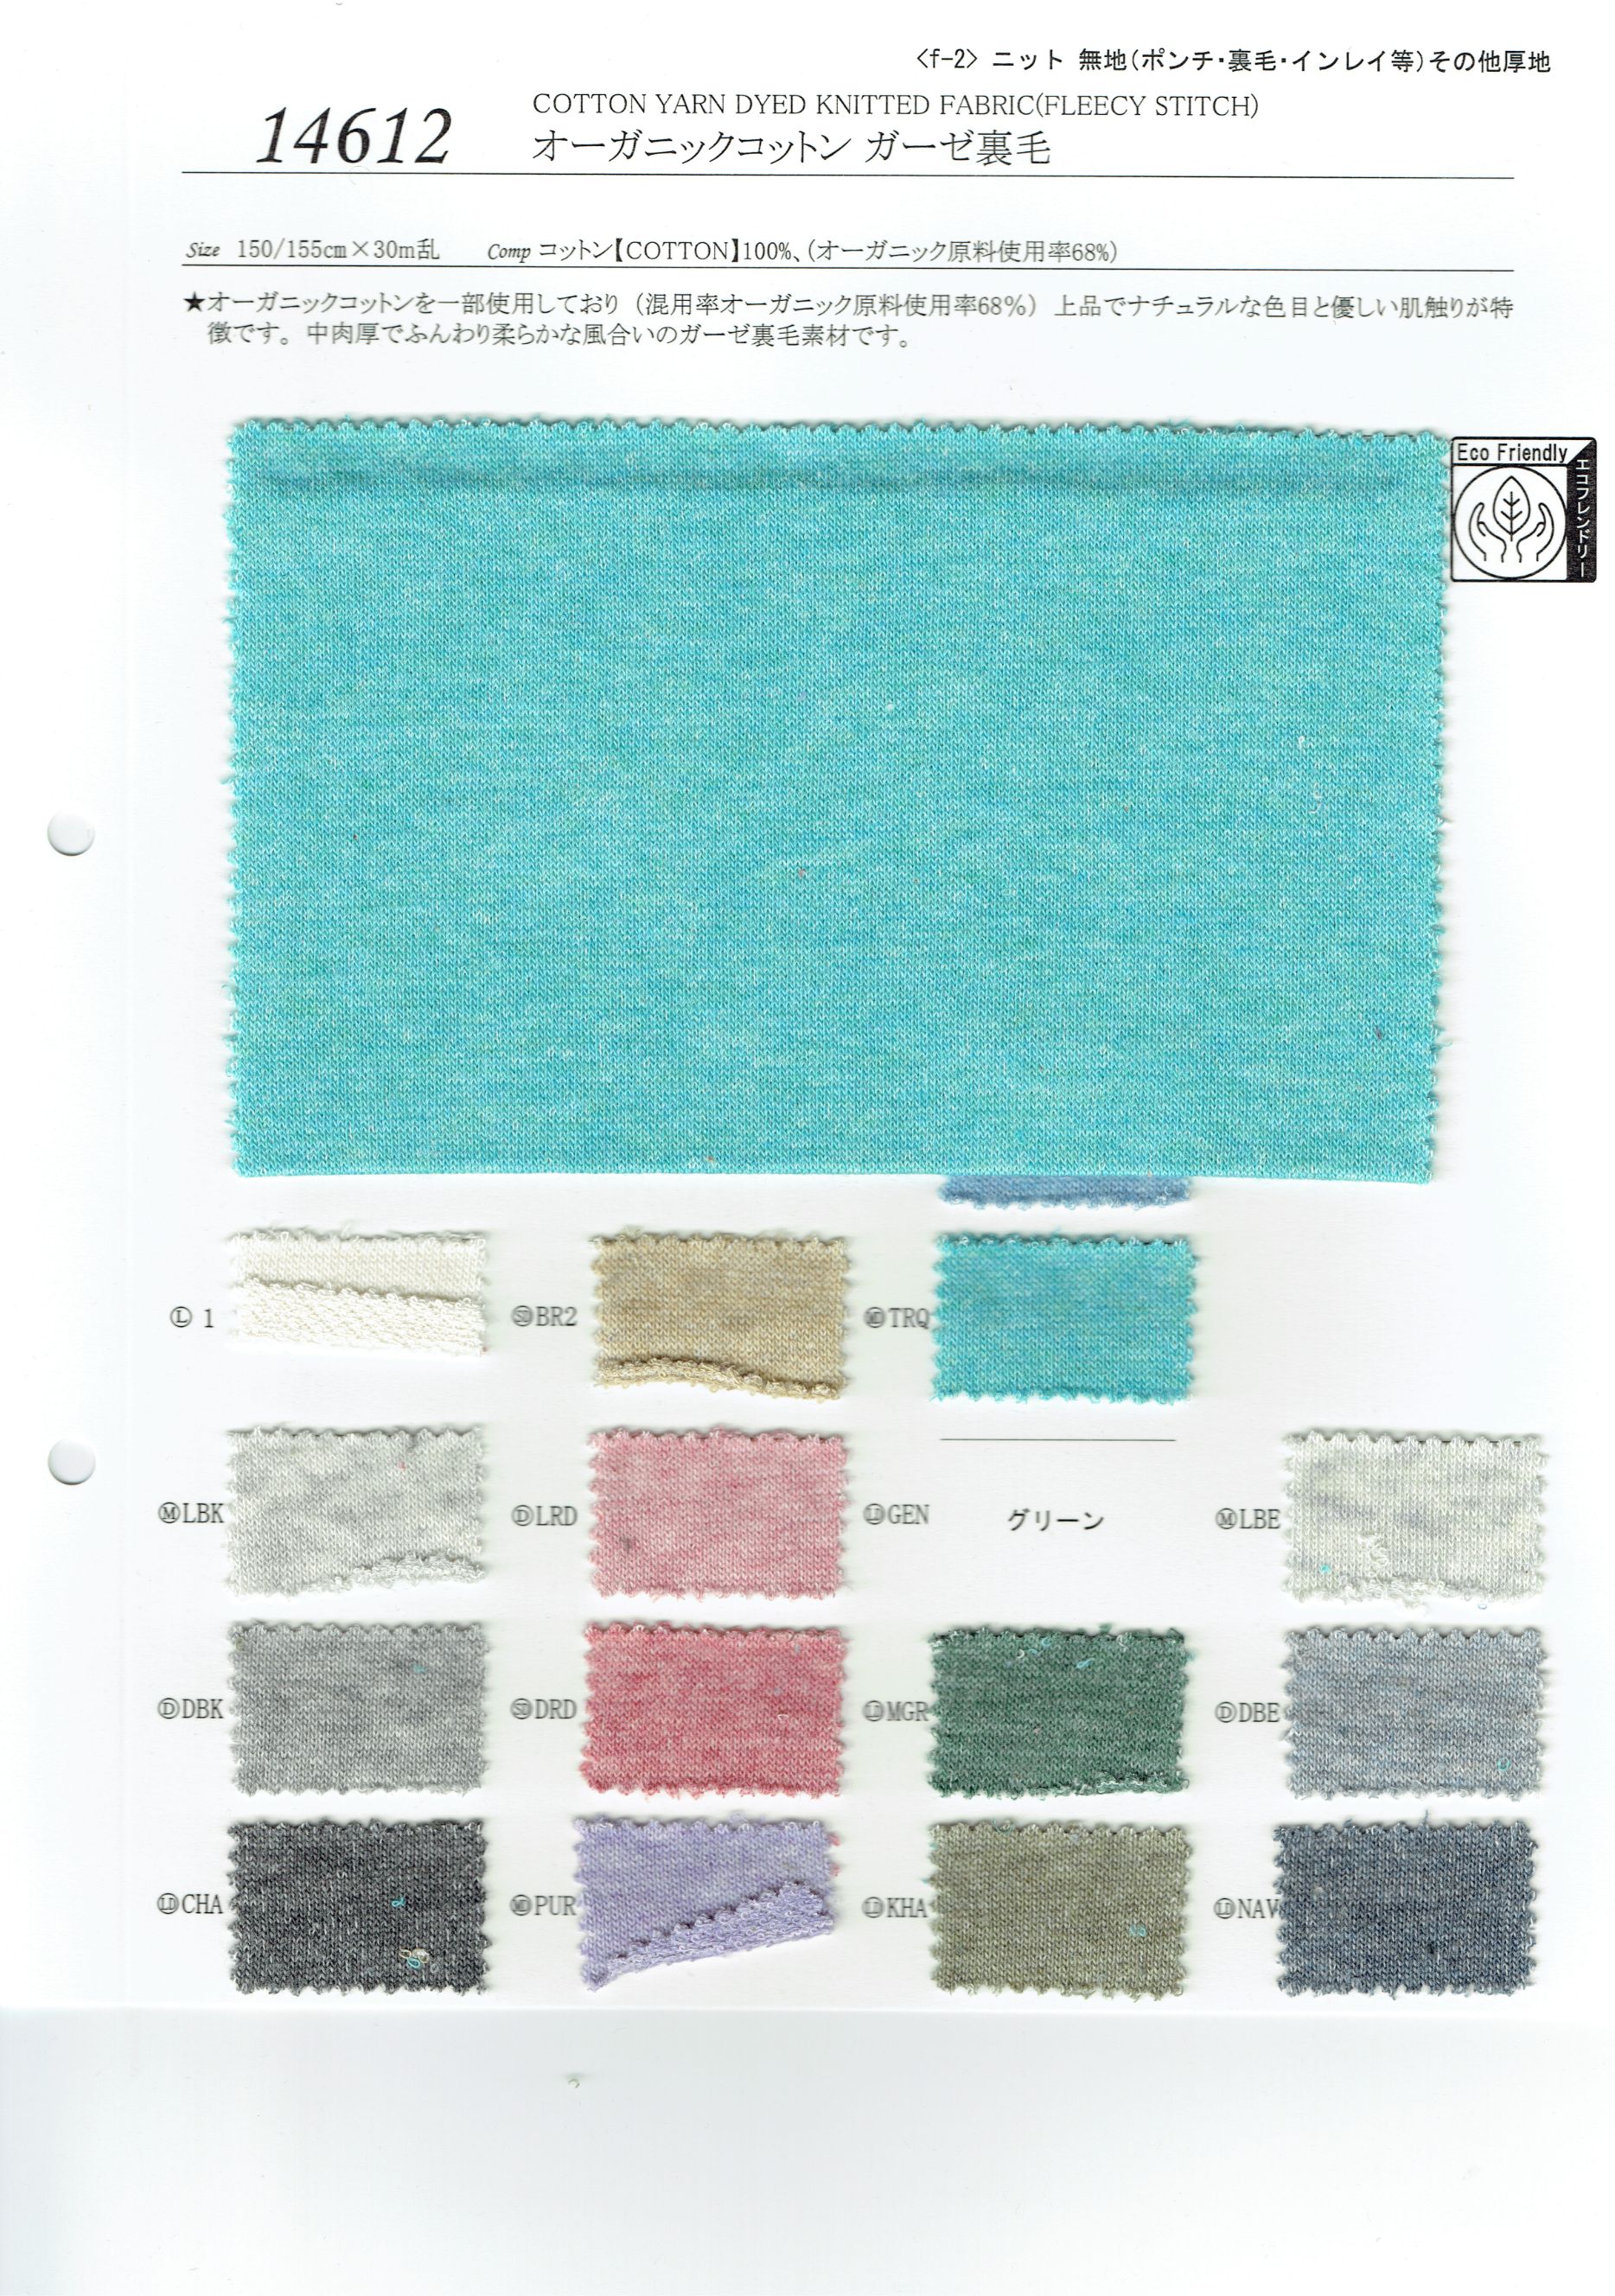 View COTTON100/[ORGANIC68%] YARN DYED KNITTED FABRIC[FLEECY STITCH] YARN DYED KNITTED FABRIC[FLEECY STITCH]